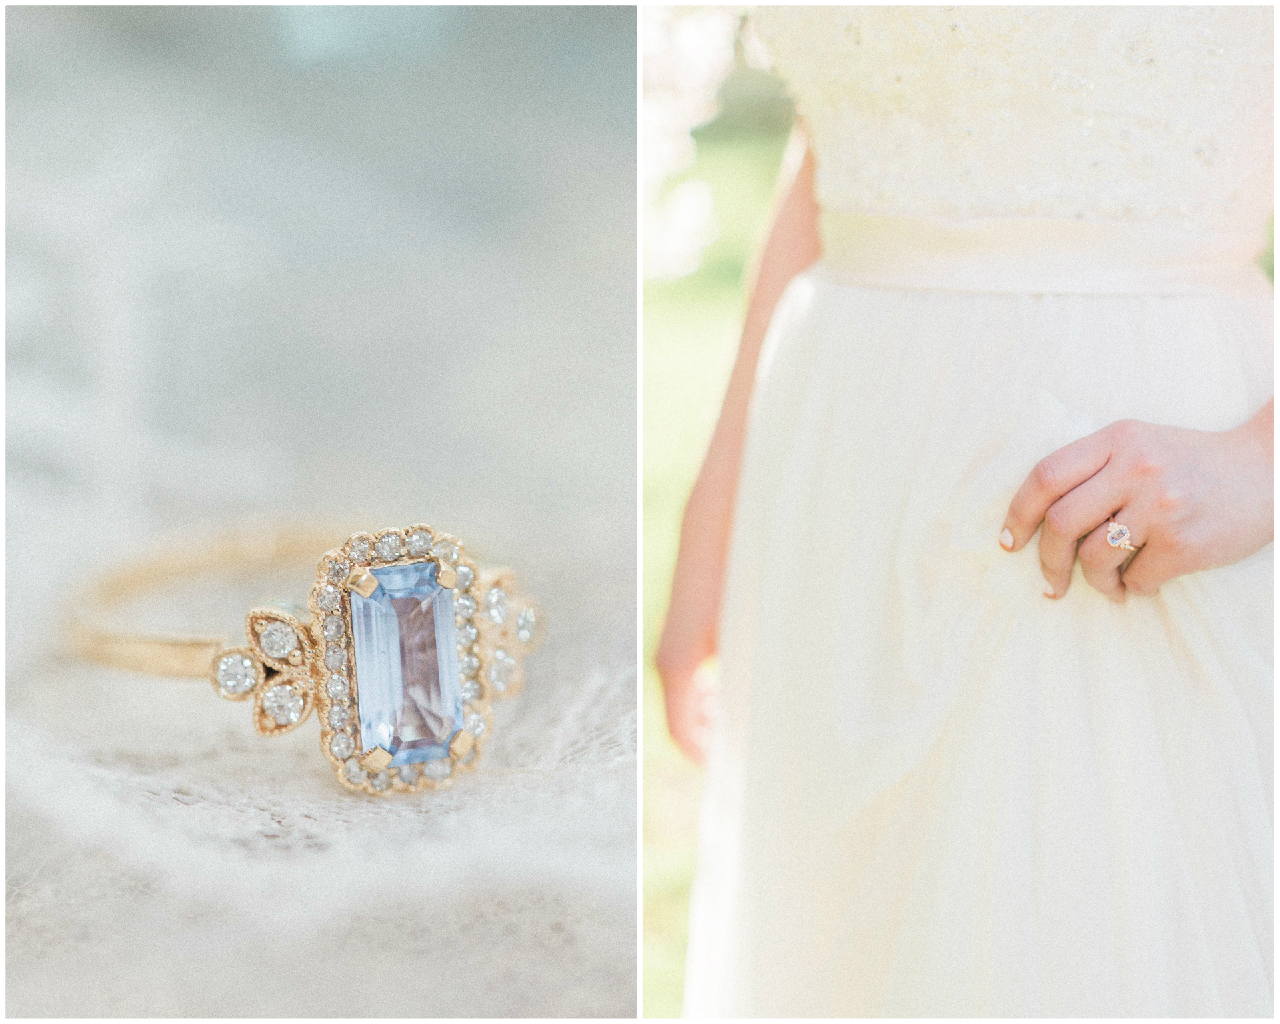 Sapphire Engagement Ring | The Day's Design | Samantha James Photography